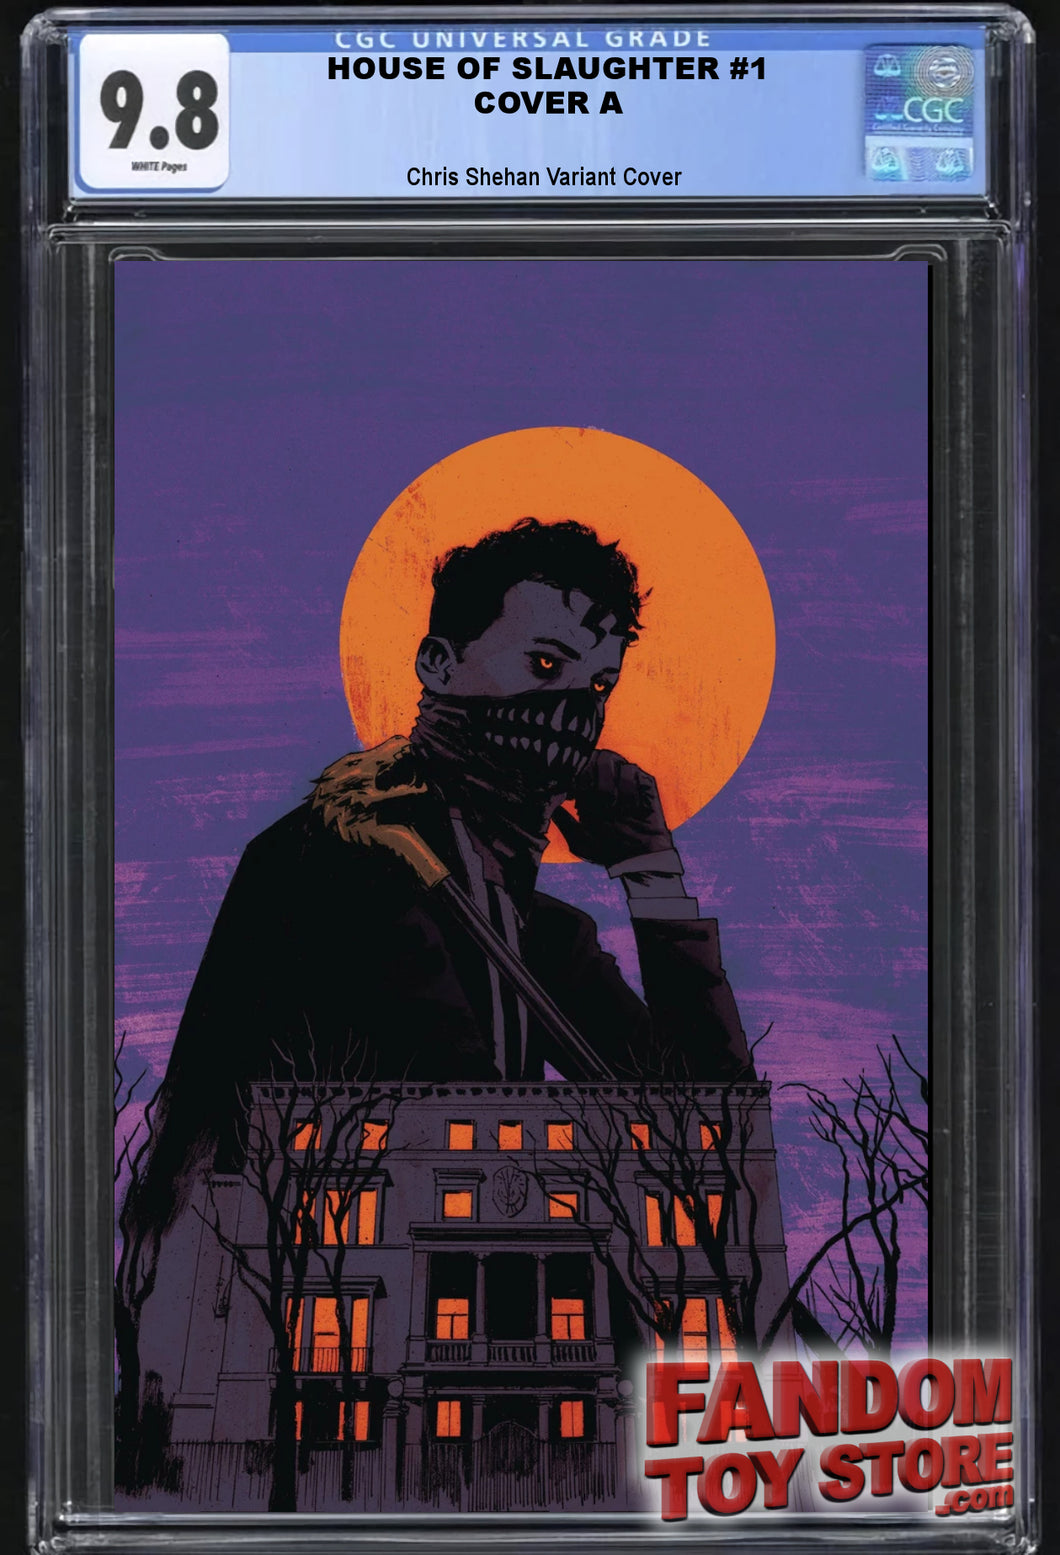 HOUSE OF SLAUGHTER #1 (CHRIS SHEHAN VARIANT COVER A)(2021) ~ CGC Graded 9.8